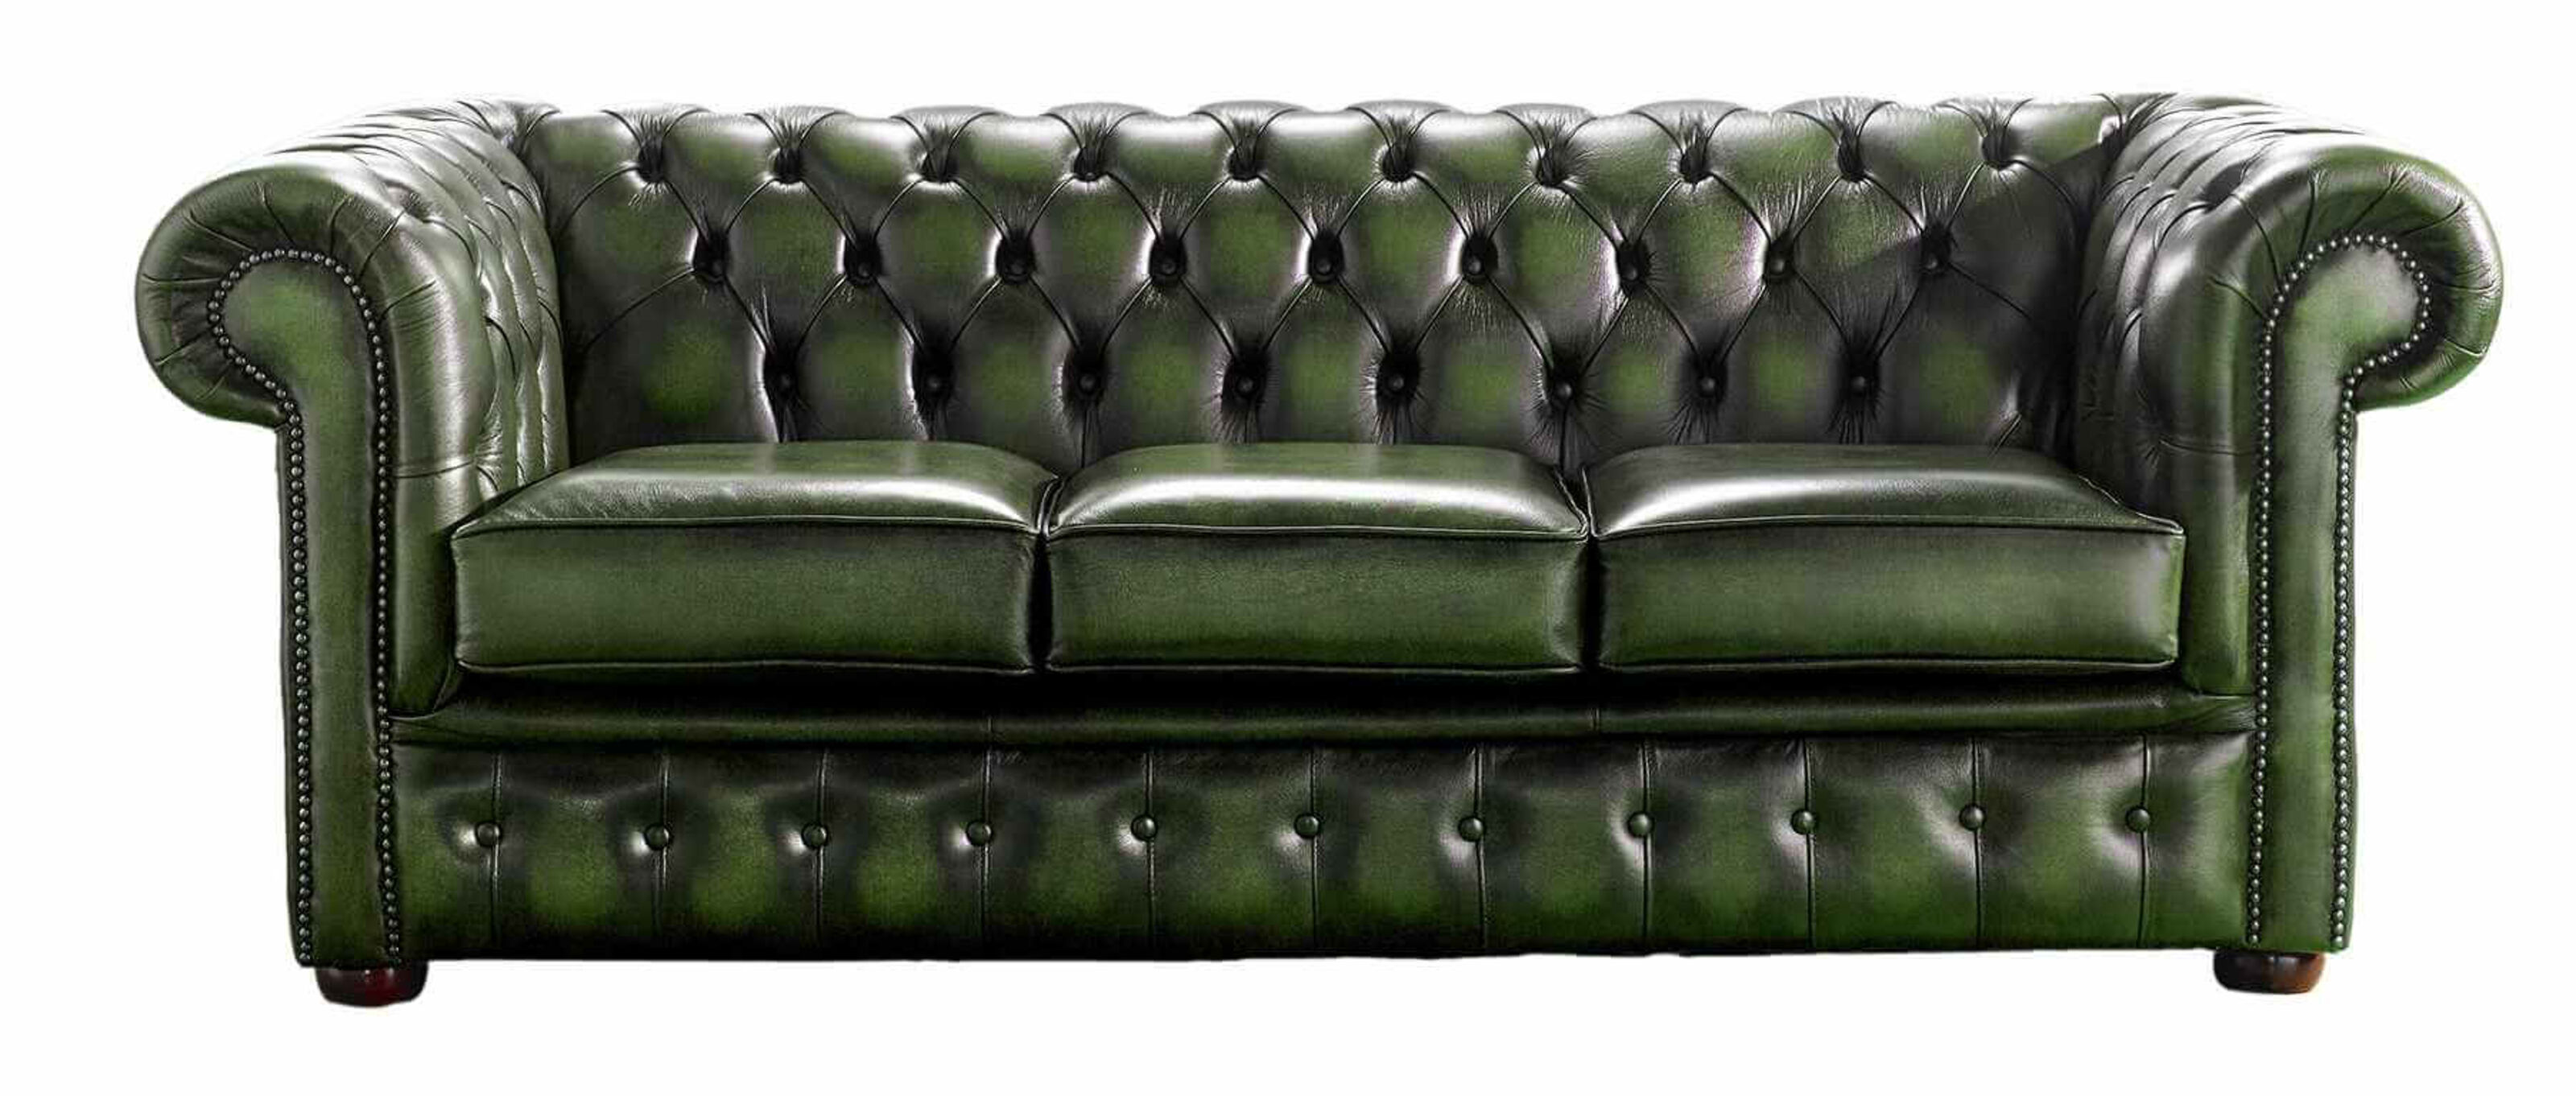 Elevate Your Space Unique Design Ideas for Chesterfield Sofas  %Post Title